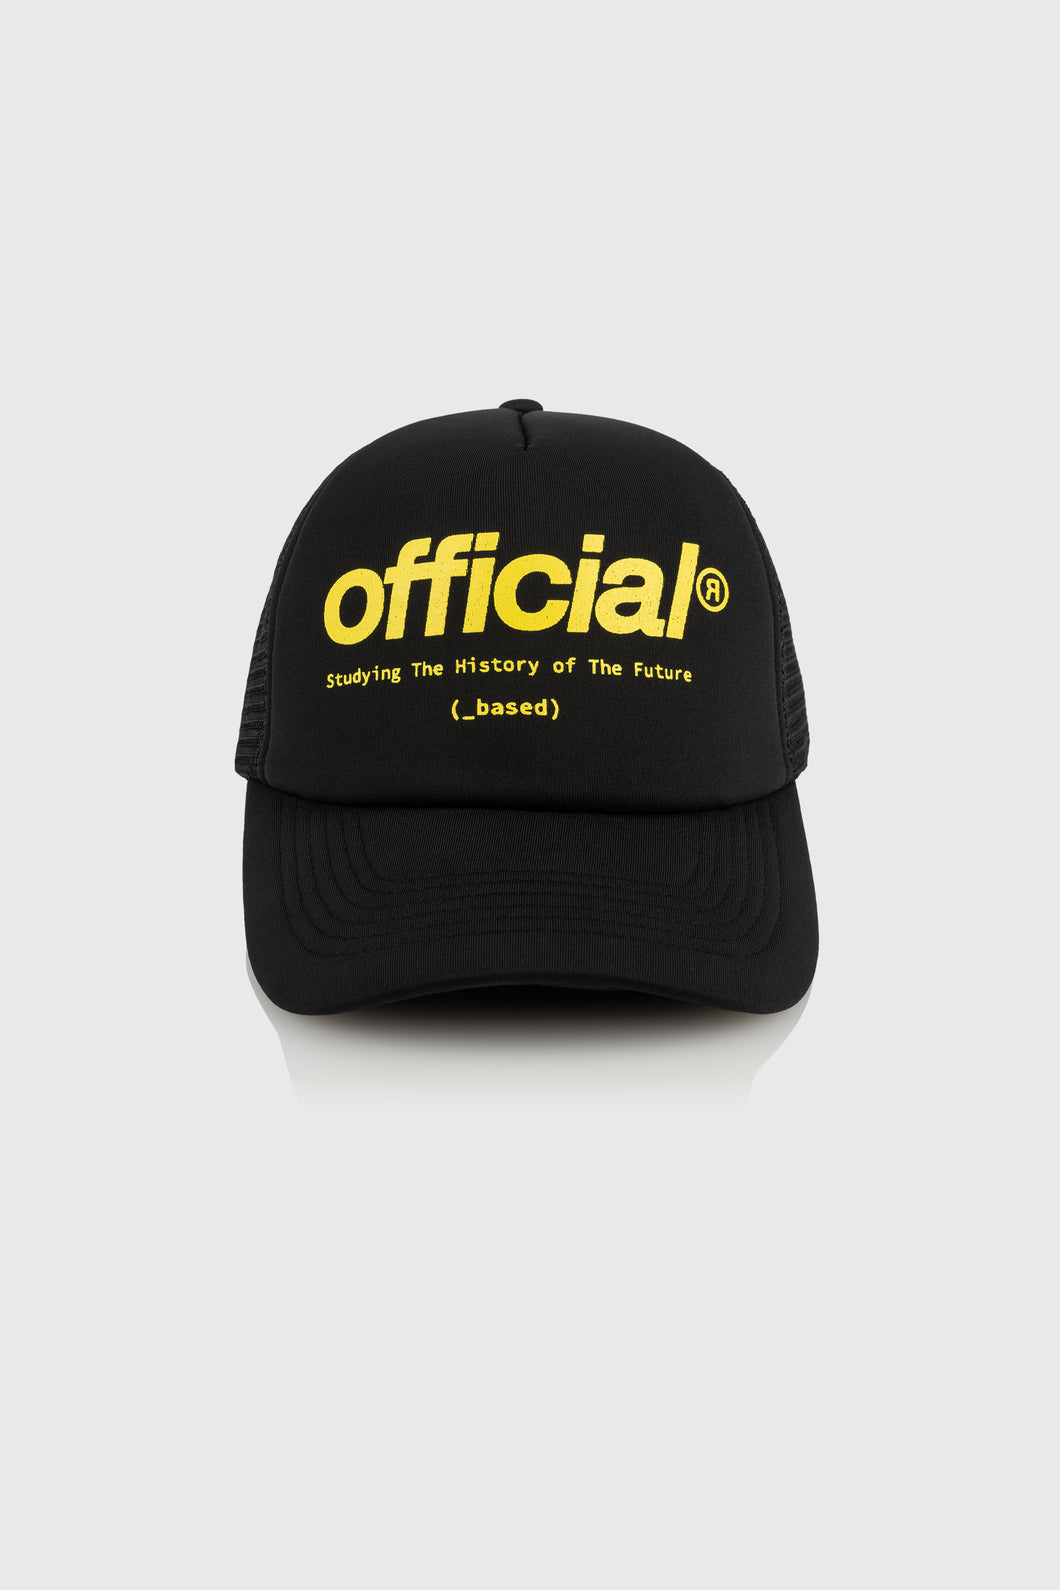 OFFICIAL/オフィシャル History Of The Future Trucker Hat (Black)メッシュキャップ